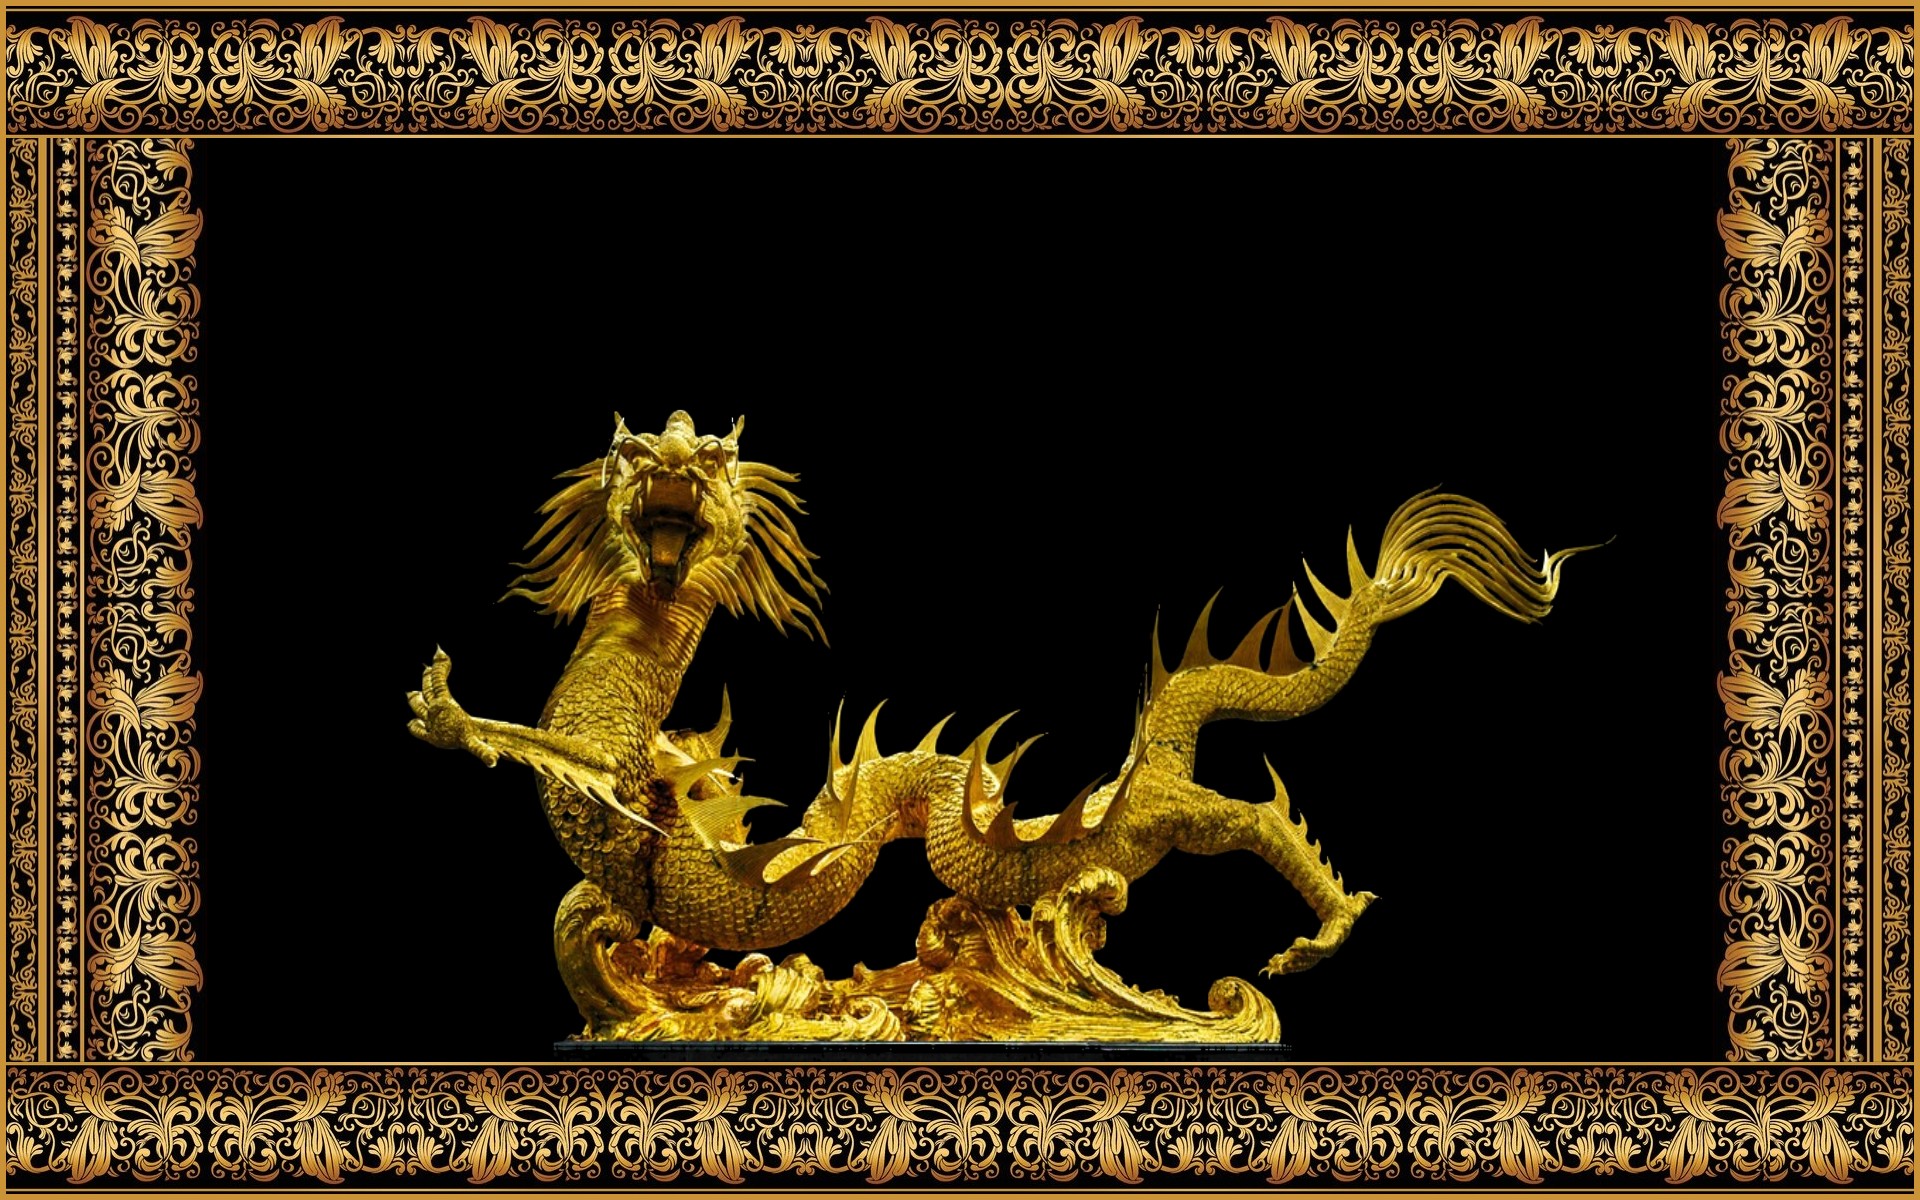 Chinas Wind Dragon Picture Frames Black Background 1920x1200